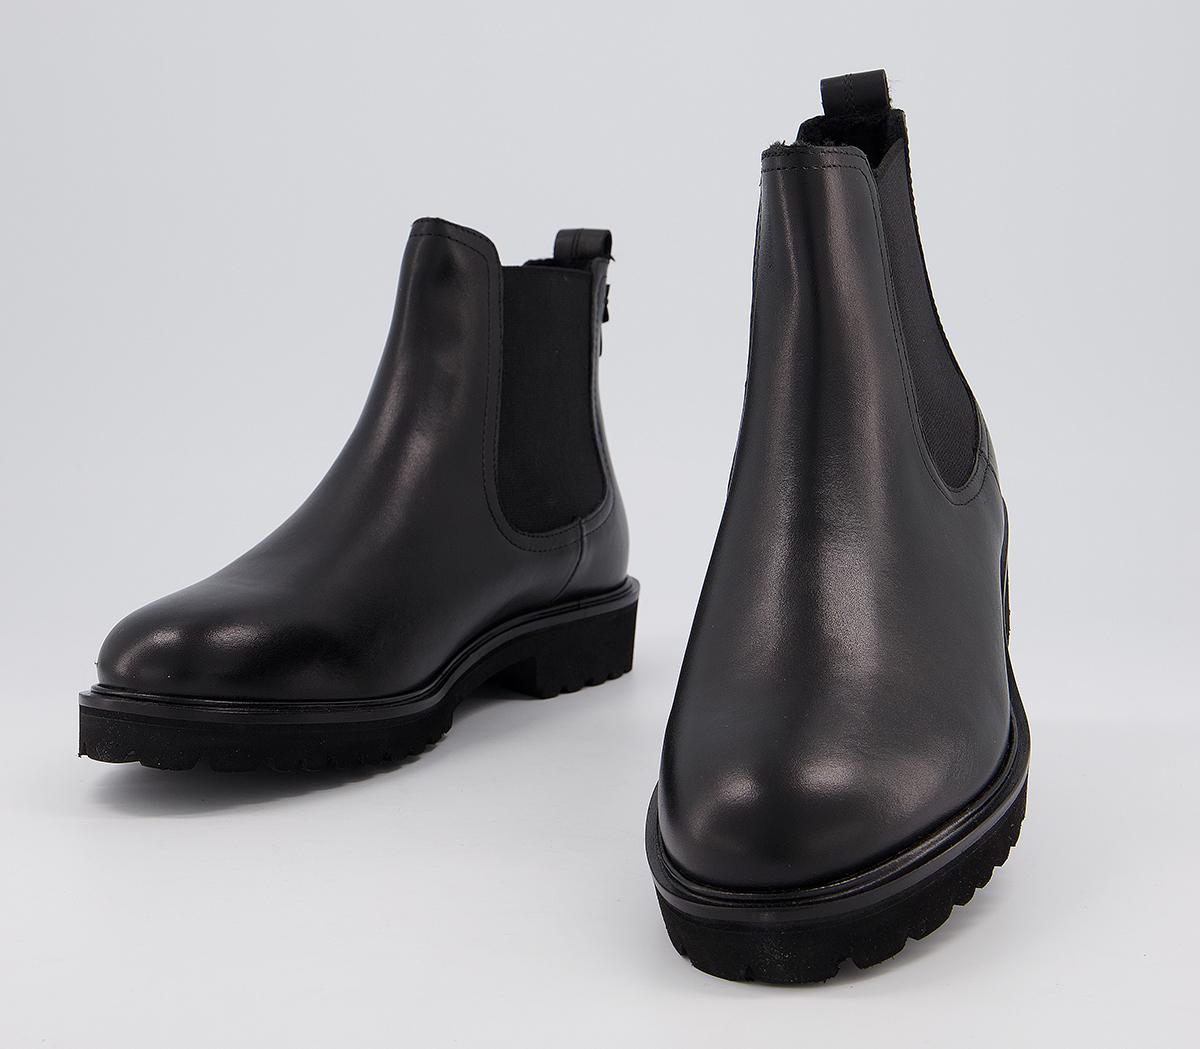 OFFICE Artful Feminine Chelsea Boots Black Leather With Fur Lining ...